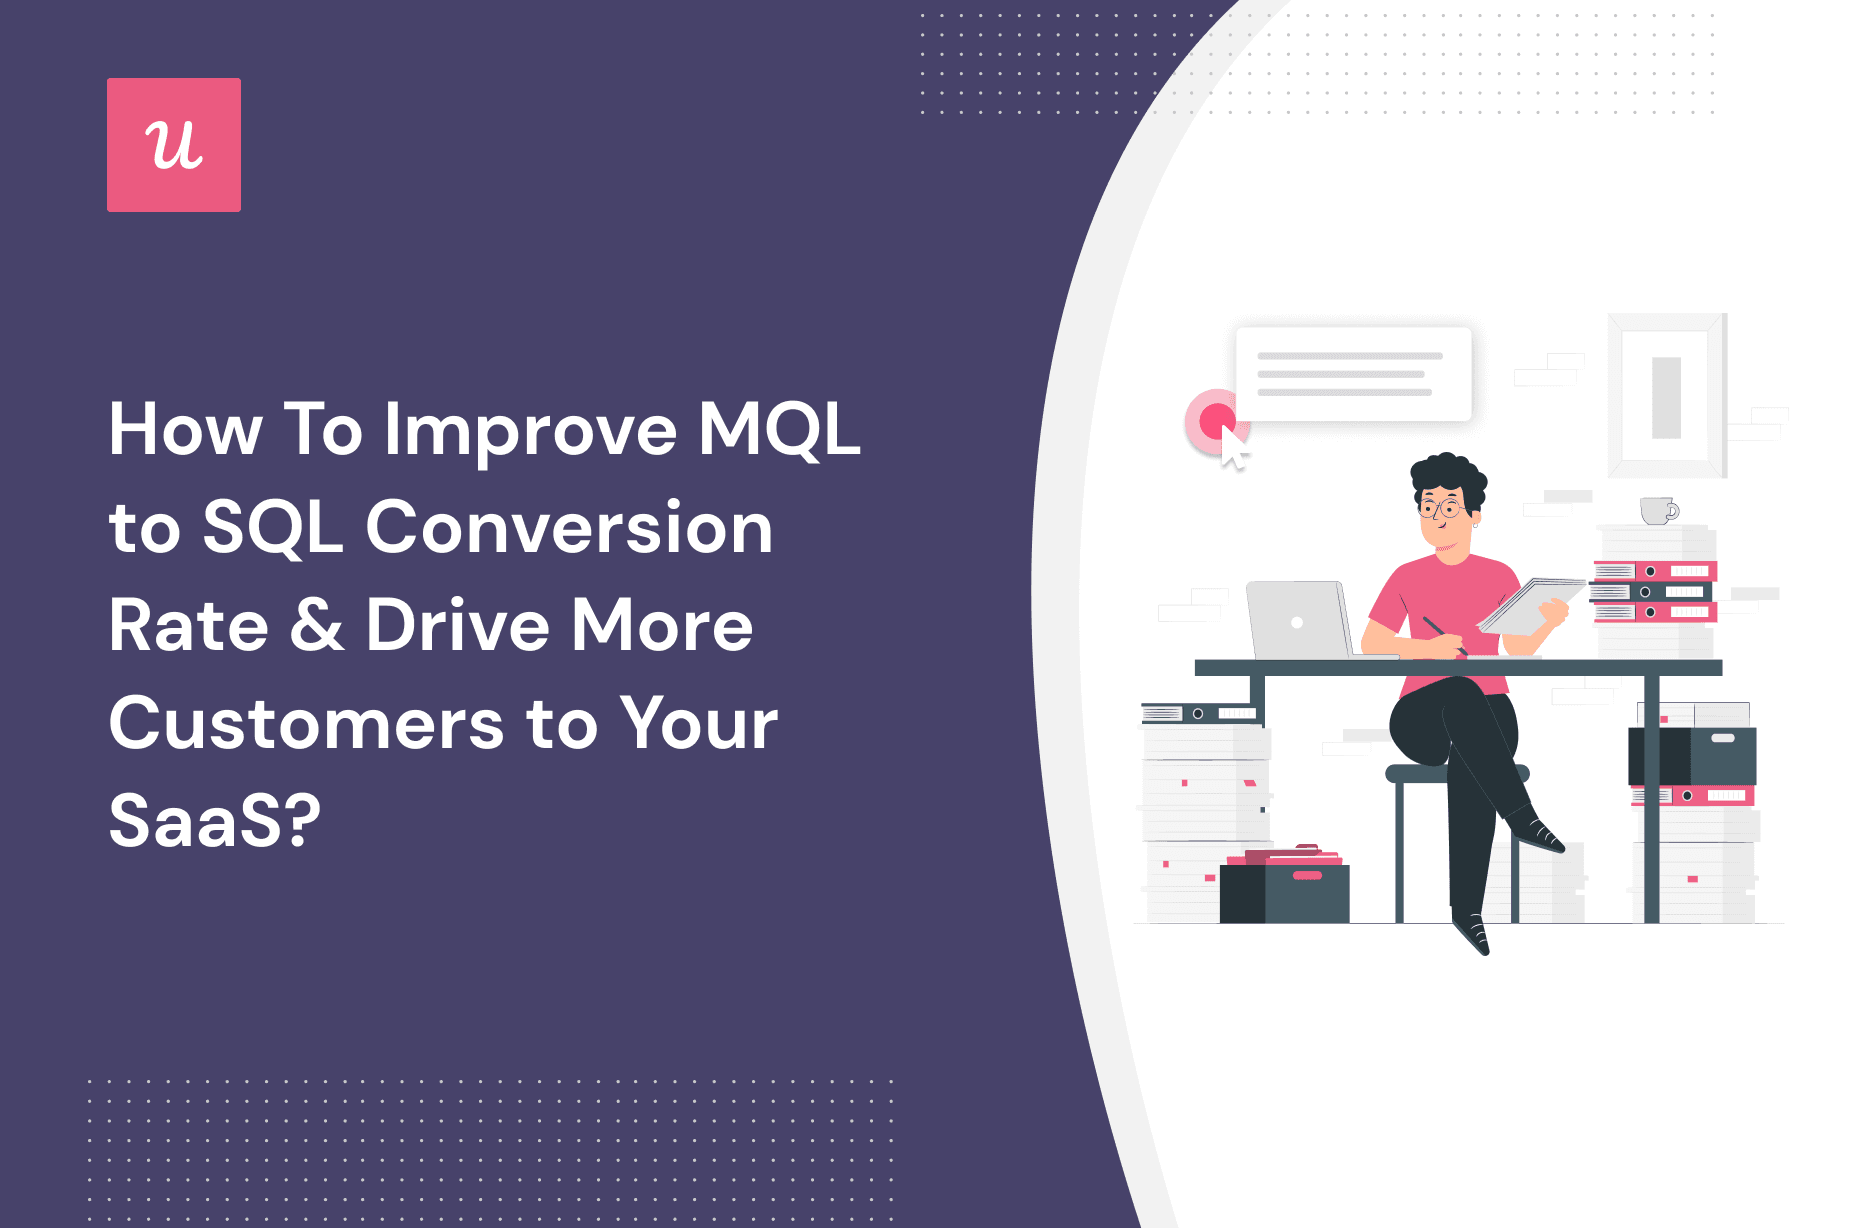 How To Improve MQL to SQL Conversion Rate & Drive More Customers to Your SaaS? cover